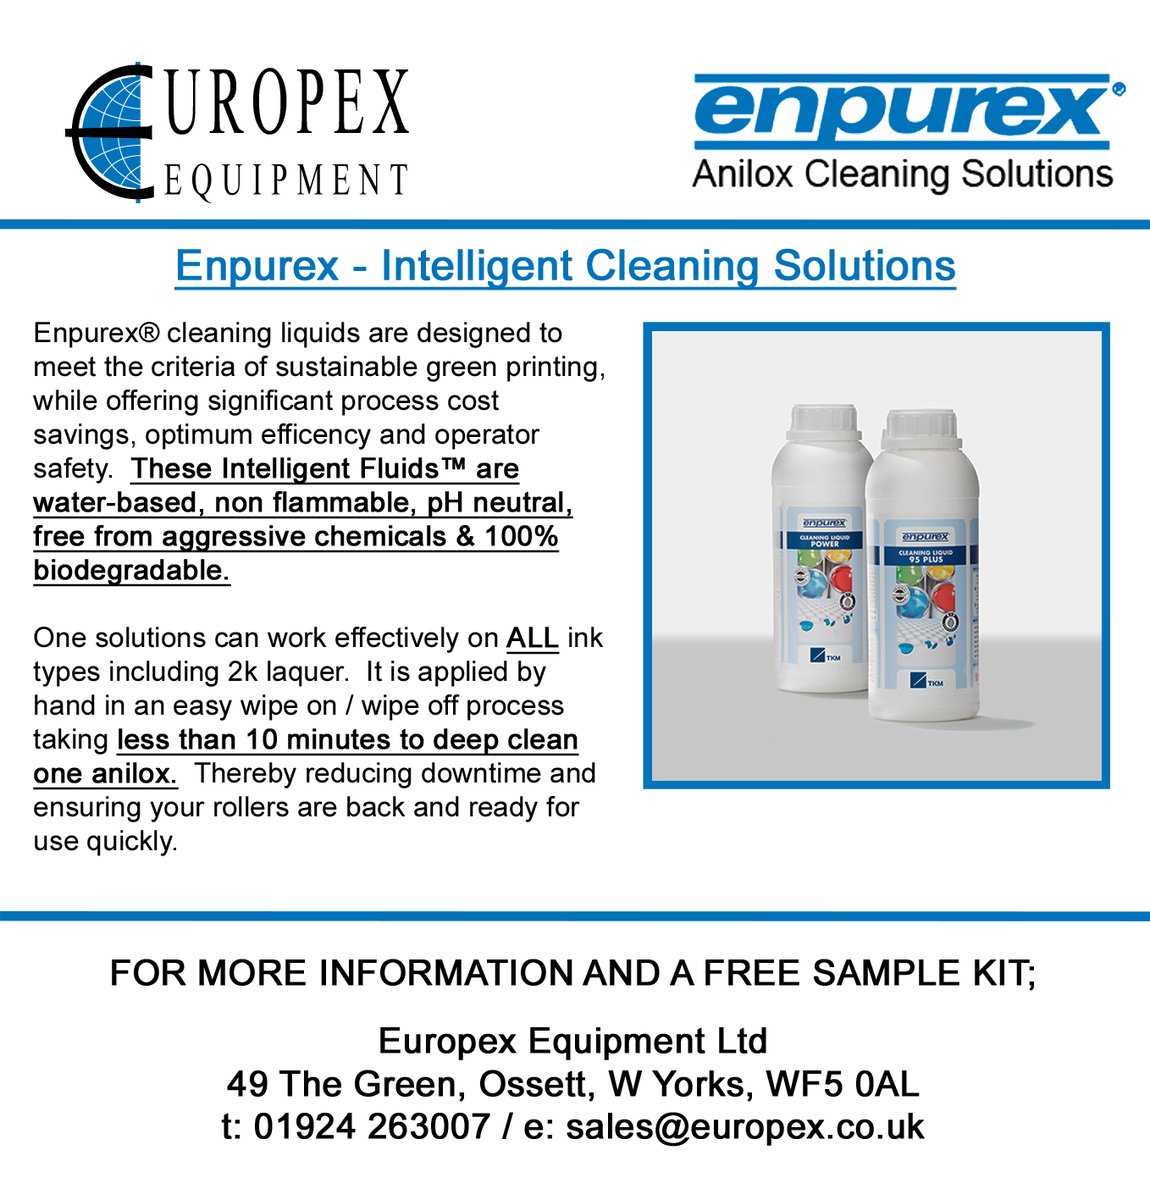 Europex Equipment are the UK distributor of Enpurex Anilox Cleaning Solutions.  Contact us for more information and your FREE SAMPLE PACK.